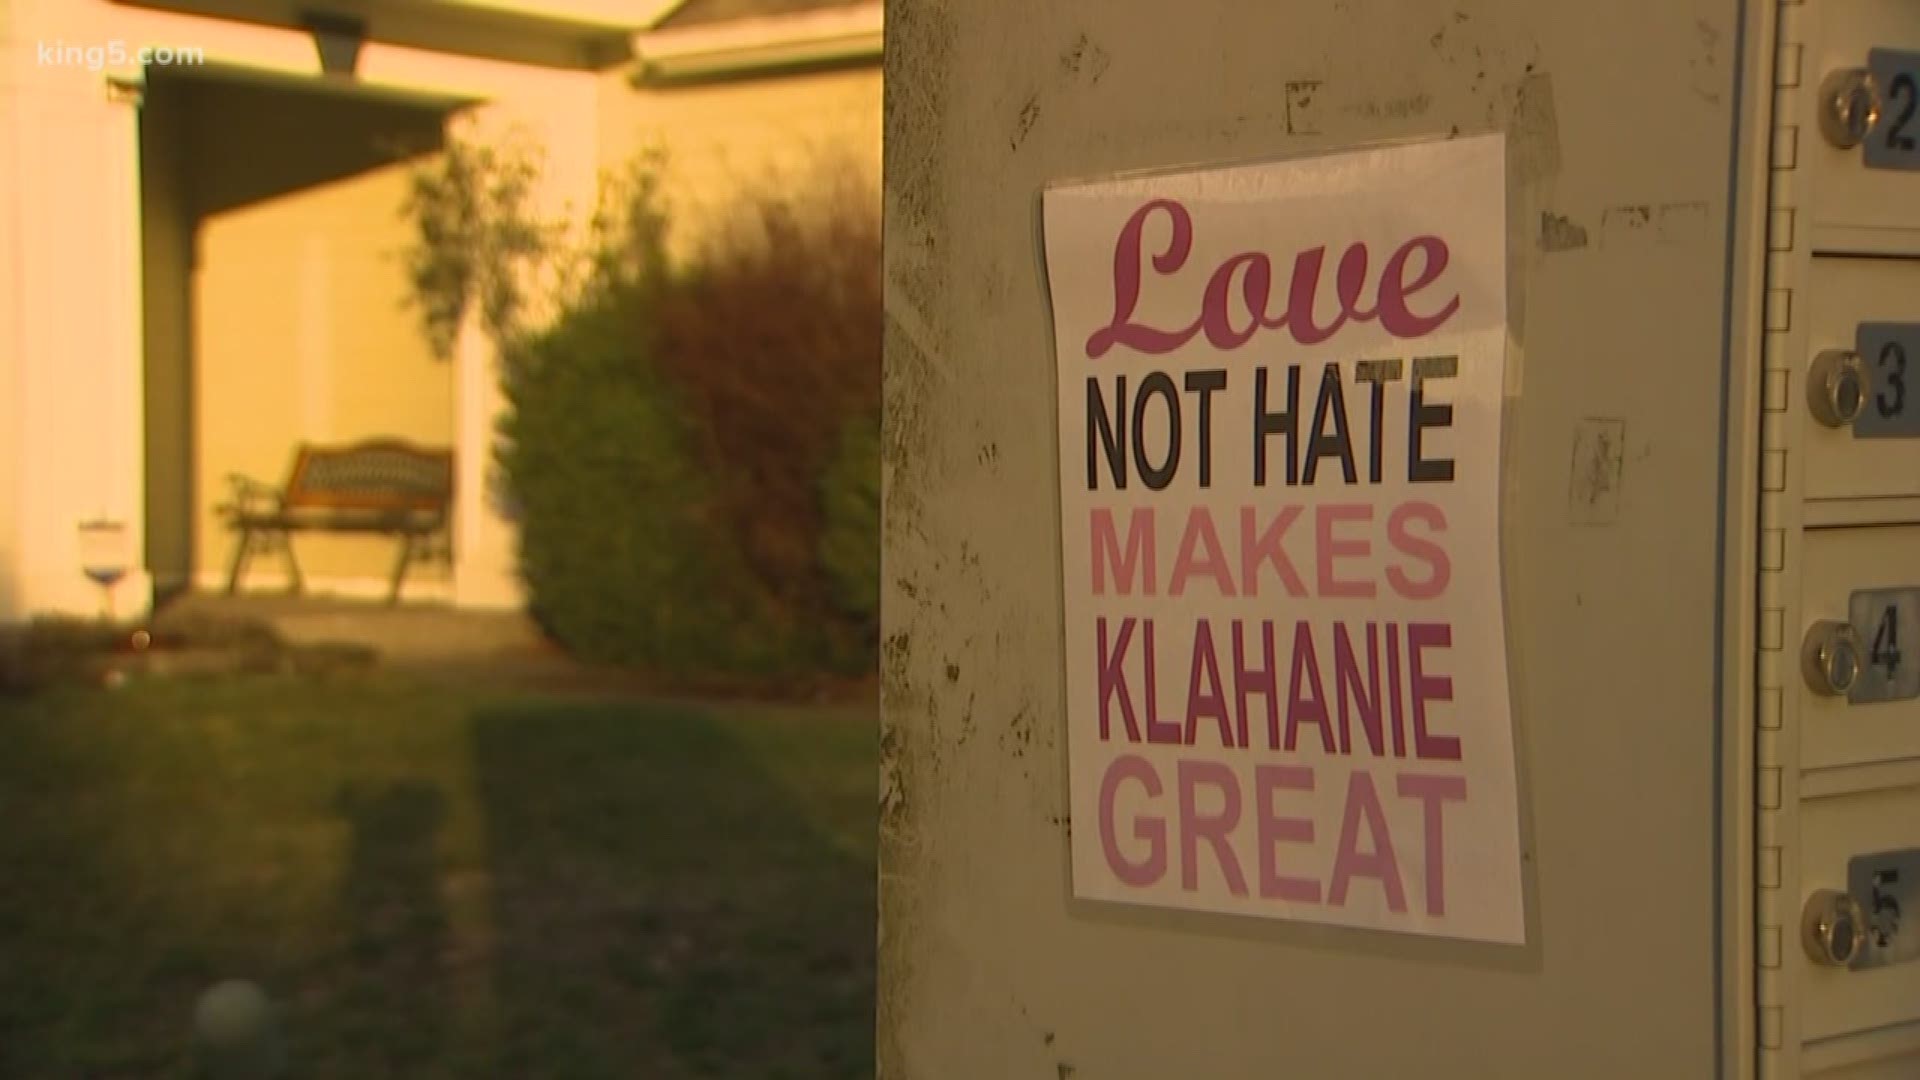 Vandals hit several locations in the Klahanie neighborhood of Sammamish. KING 5's Amy Moreno talked with victims and neighbors about how they want to stand-up to the hate.